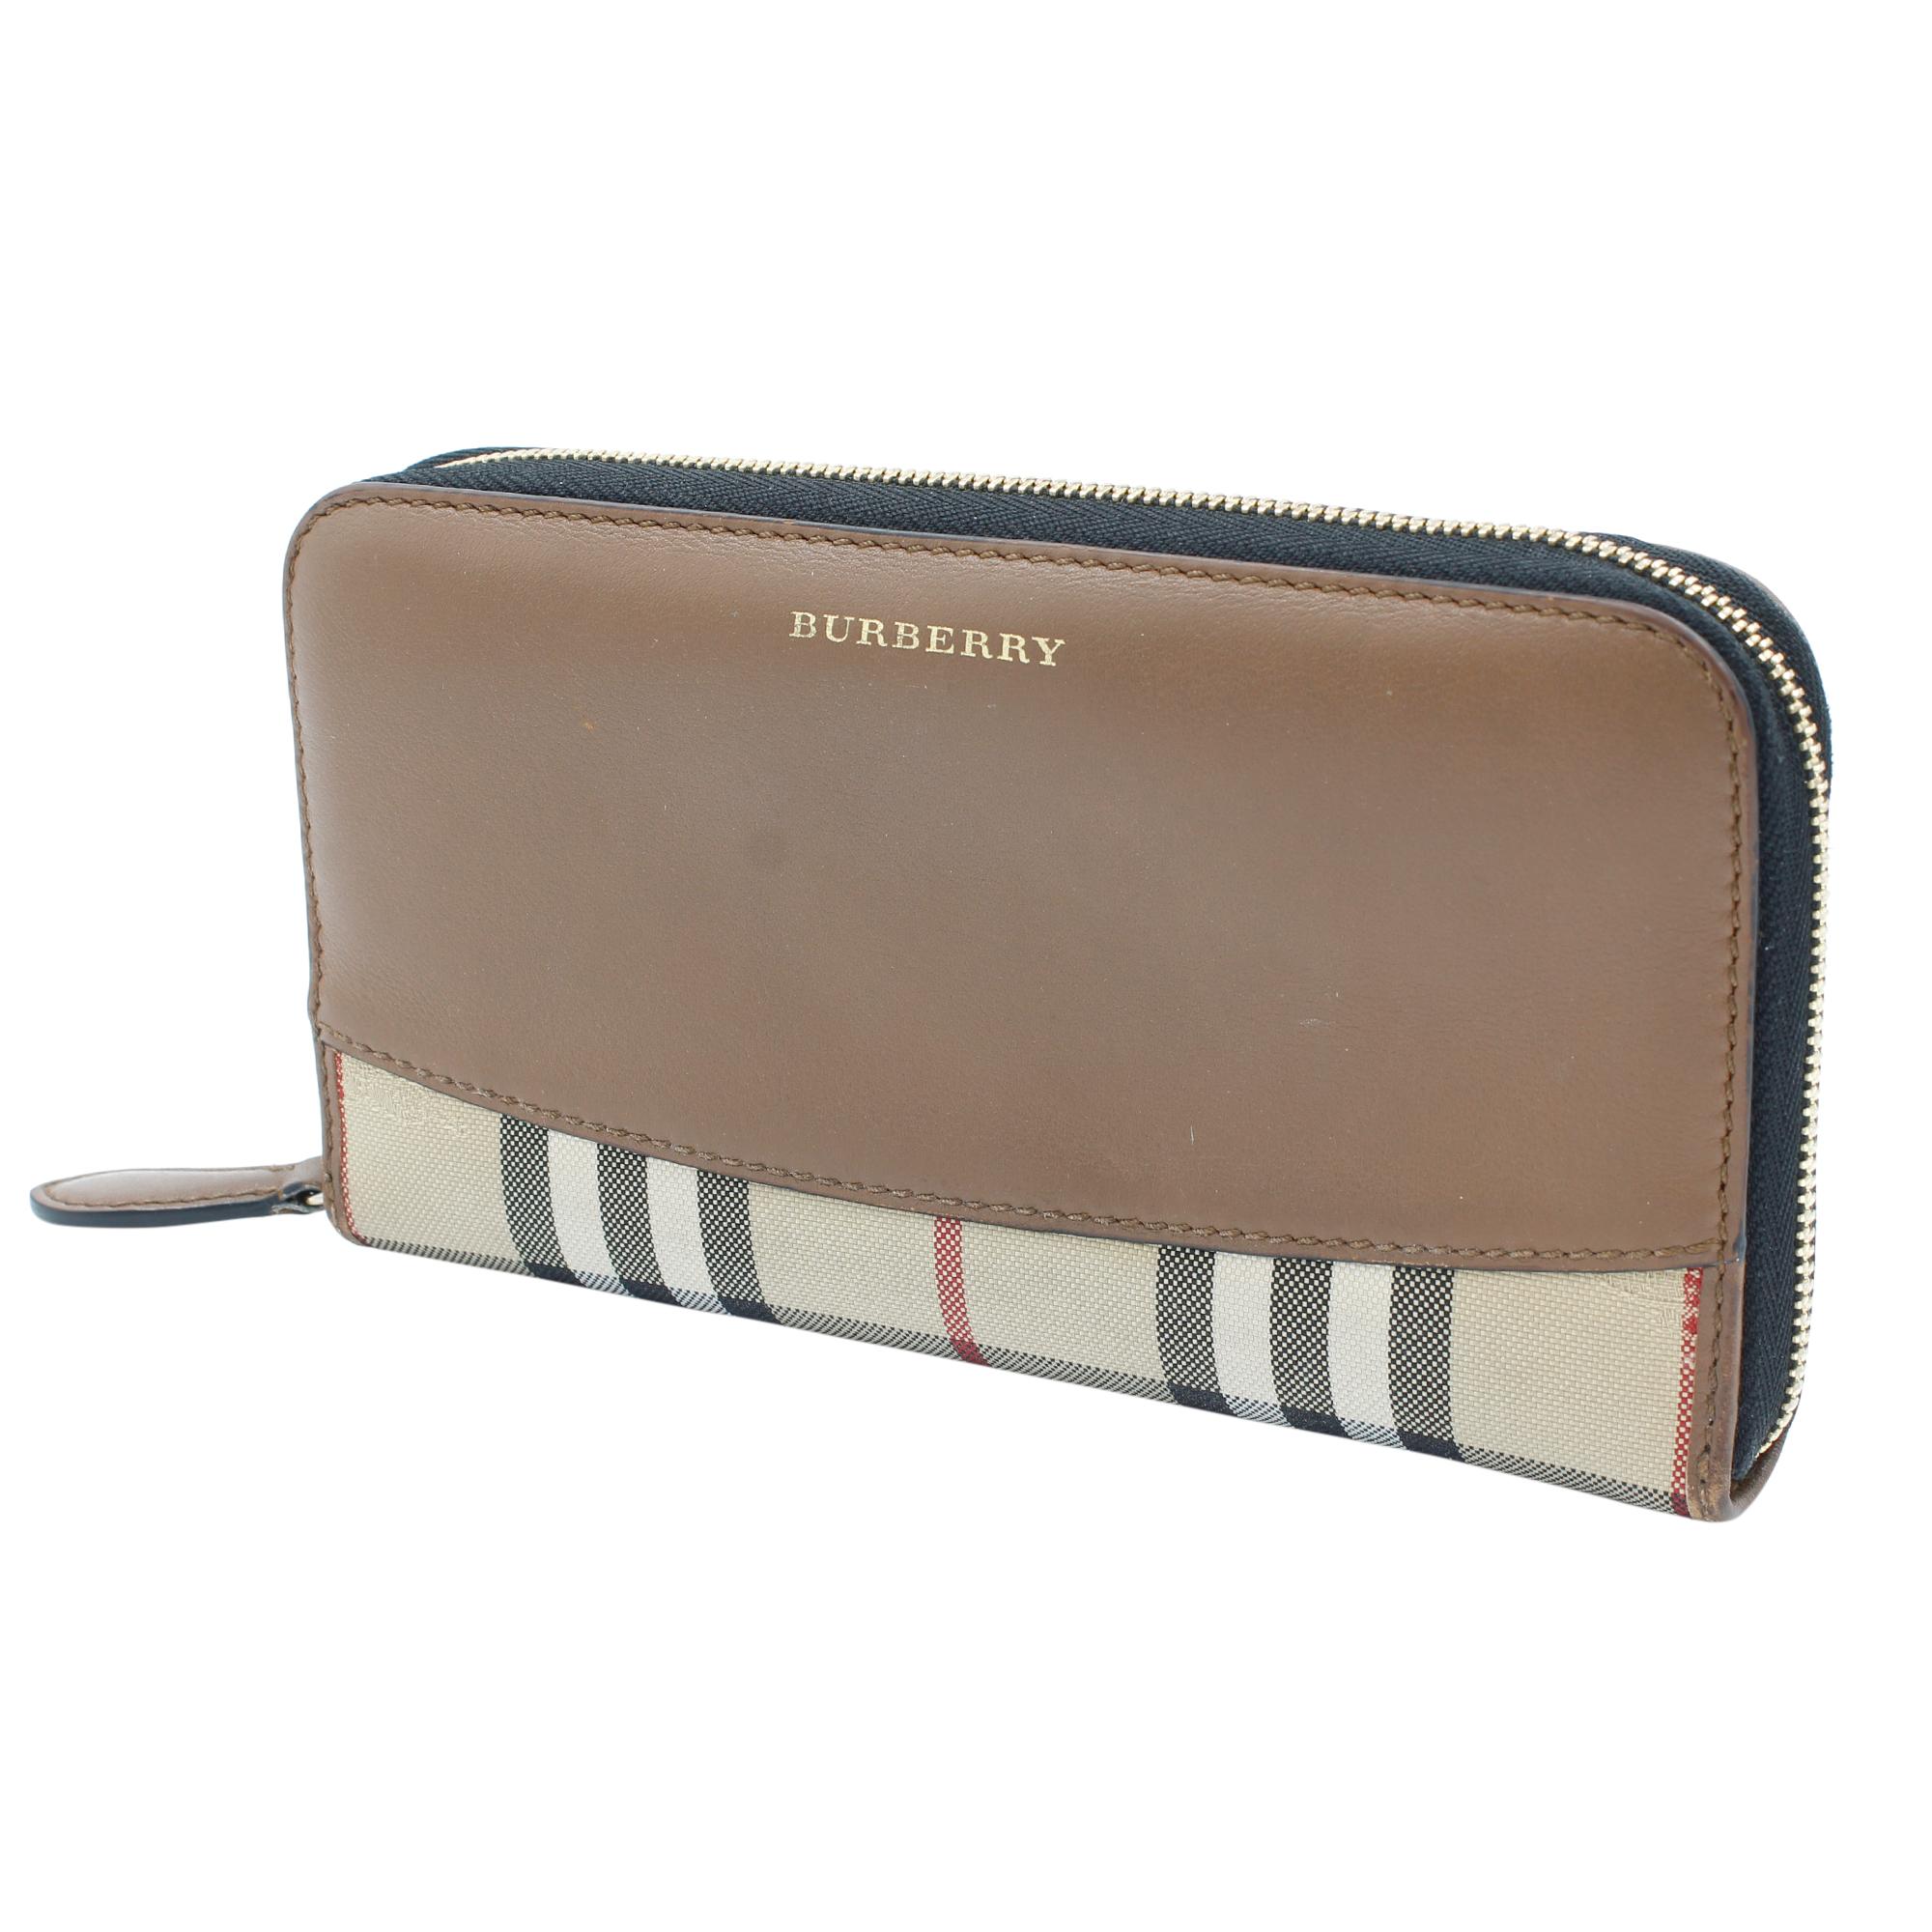 Tan brown leather house check wallet from Burberry.

normal wear sign as visible in pictures.  small torn on corner of wallet. 

Colour: TAN

Made in Italy

Composition

Outer:
polyimide 100%
leather 100%